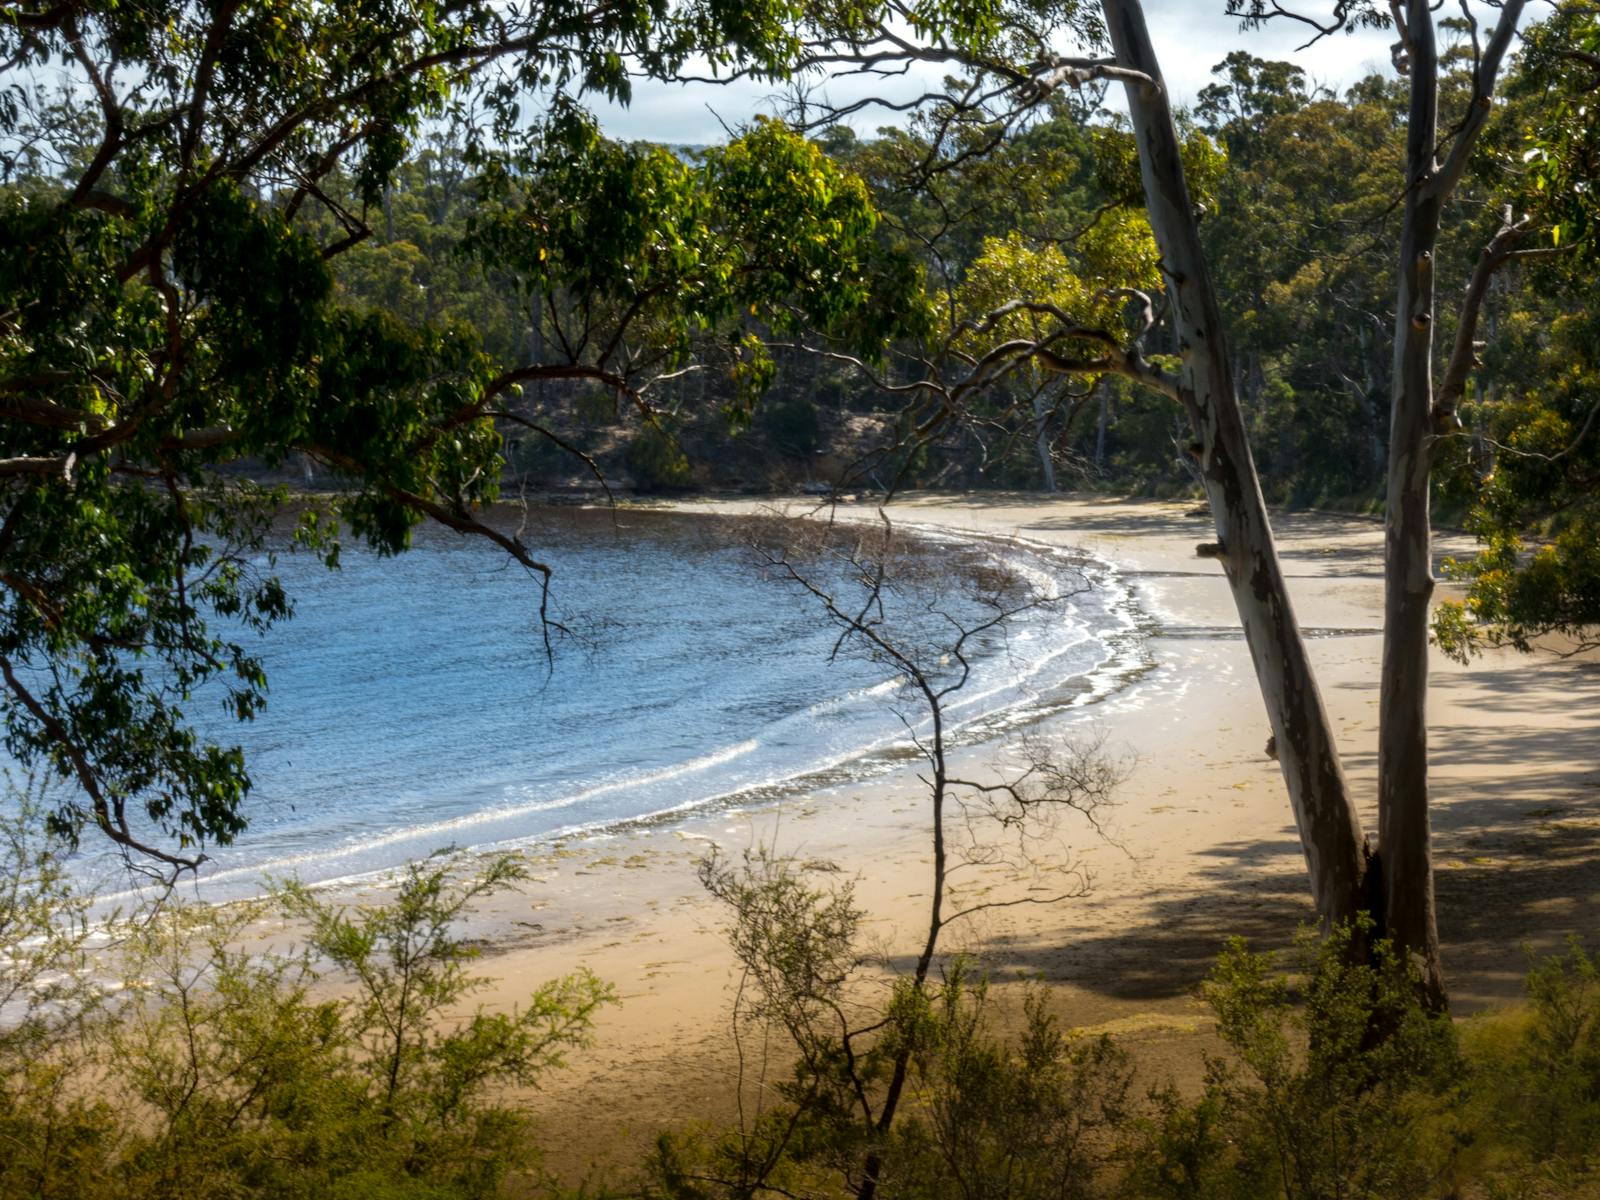 View of tree lined sandy beach